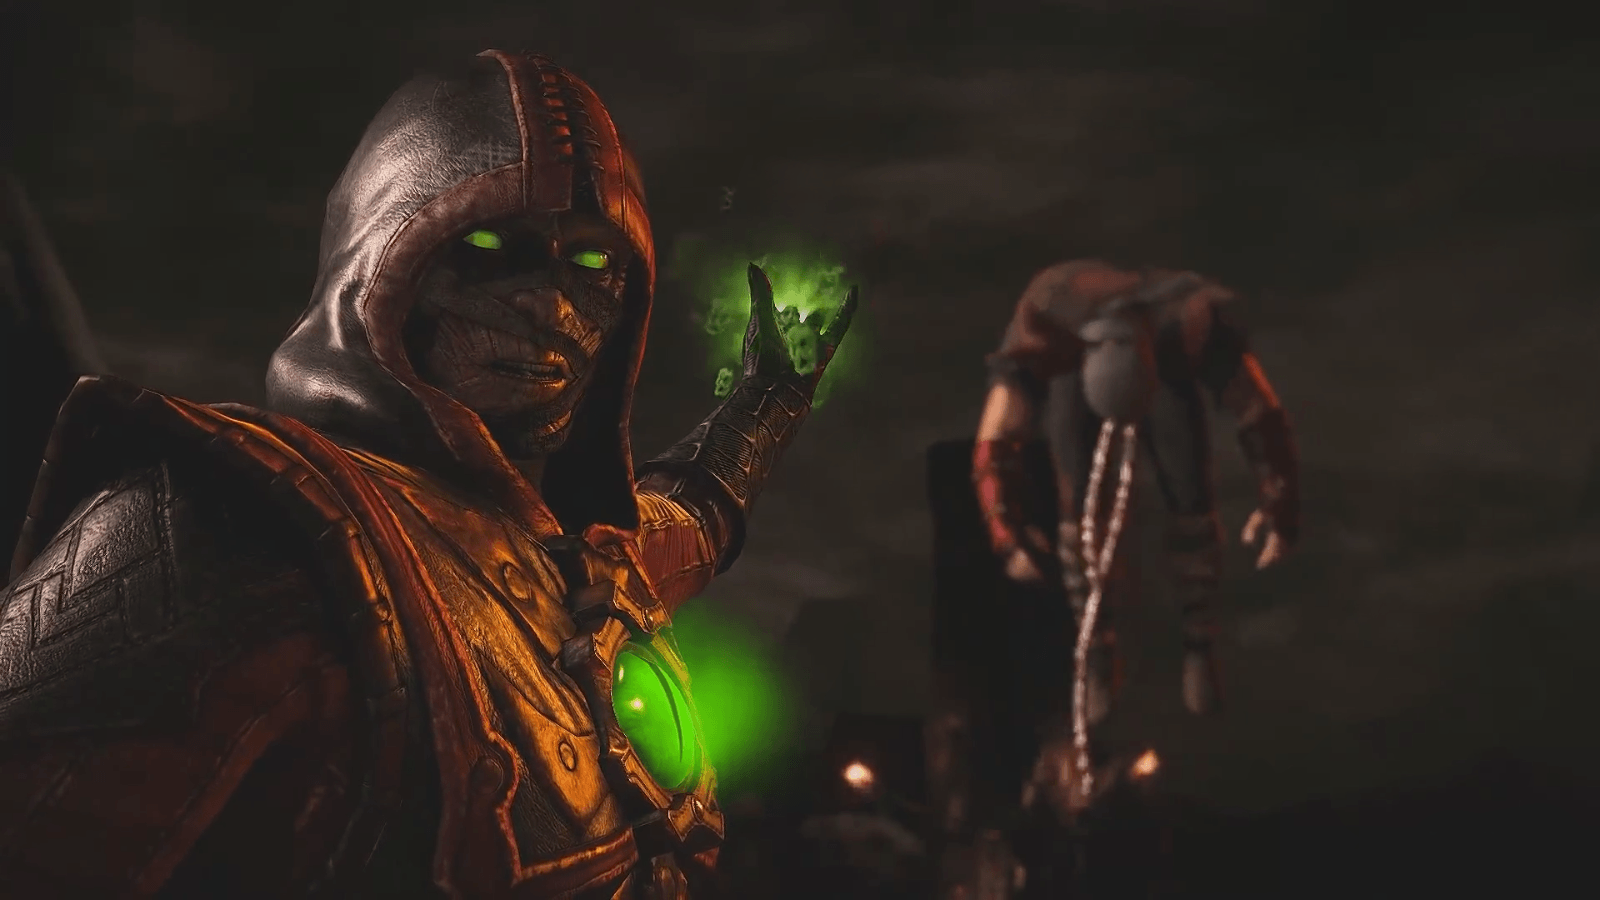 Ermac Wallpaper W O Fatality Text, For Those Interested: MortalKombat